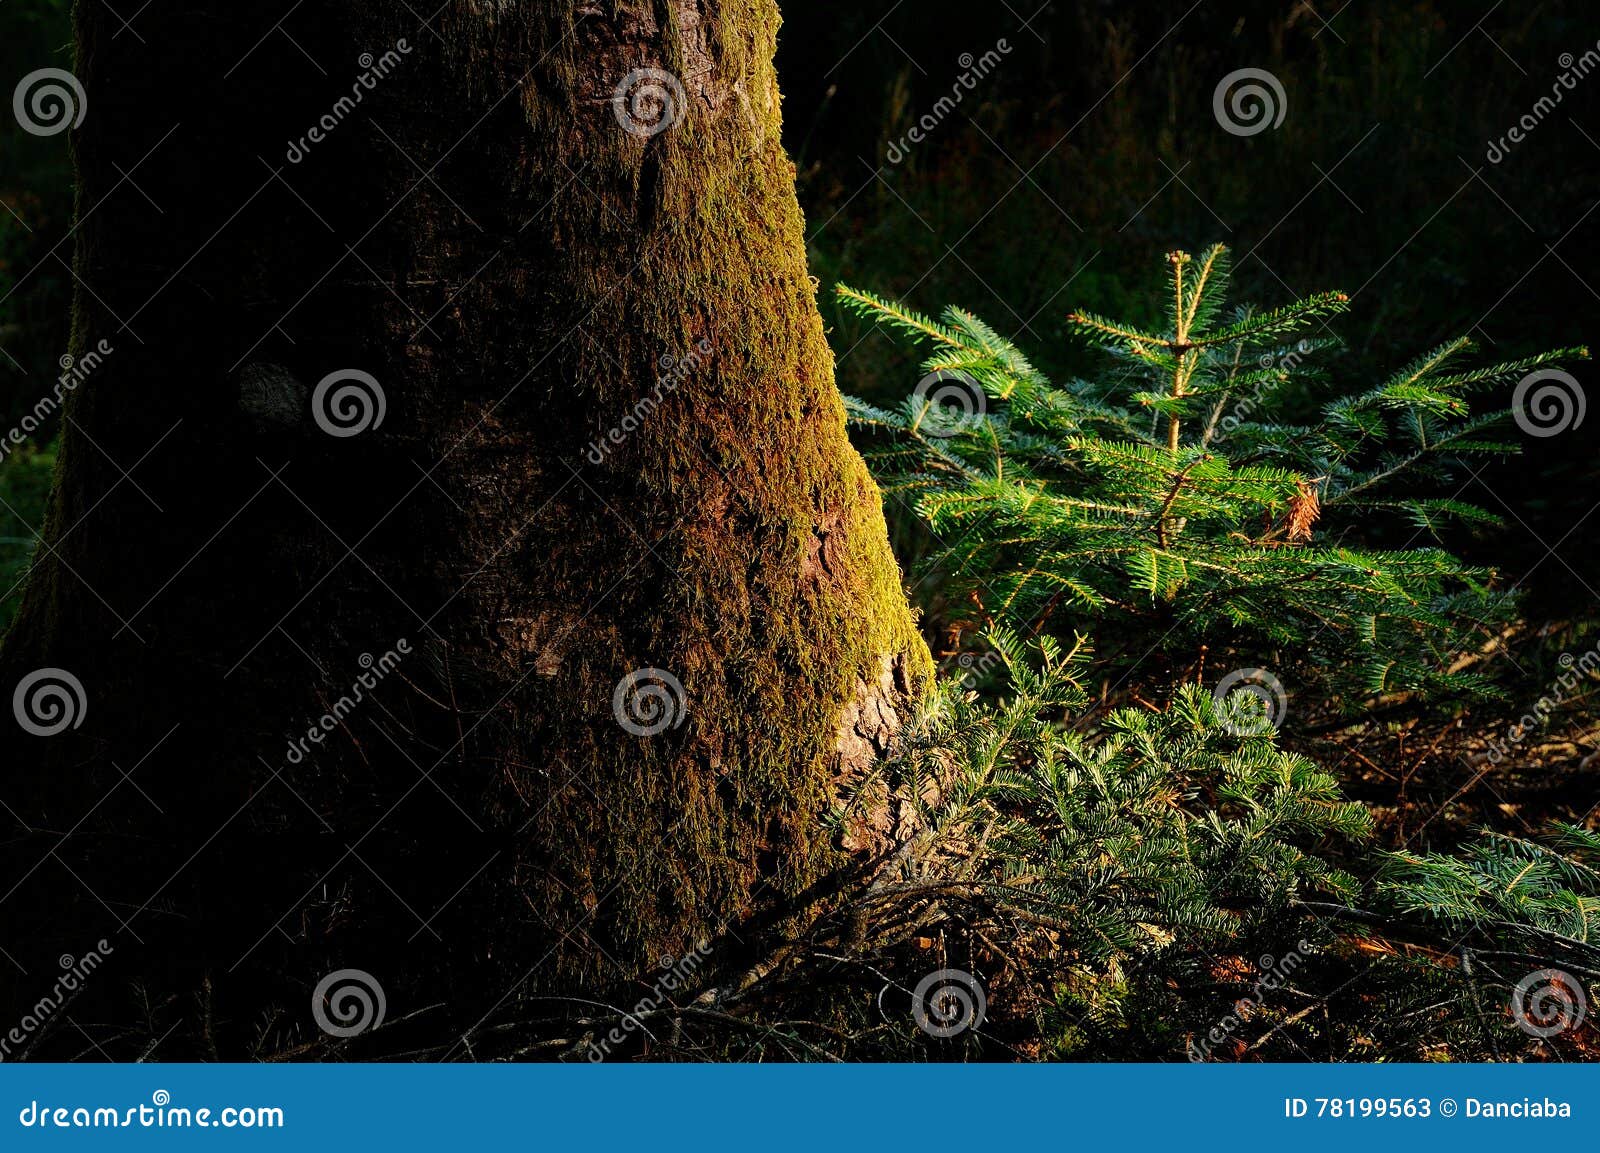 young fir in a dark forest on tuscany mountain.